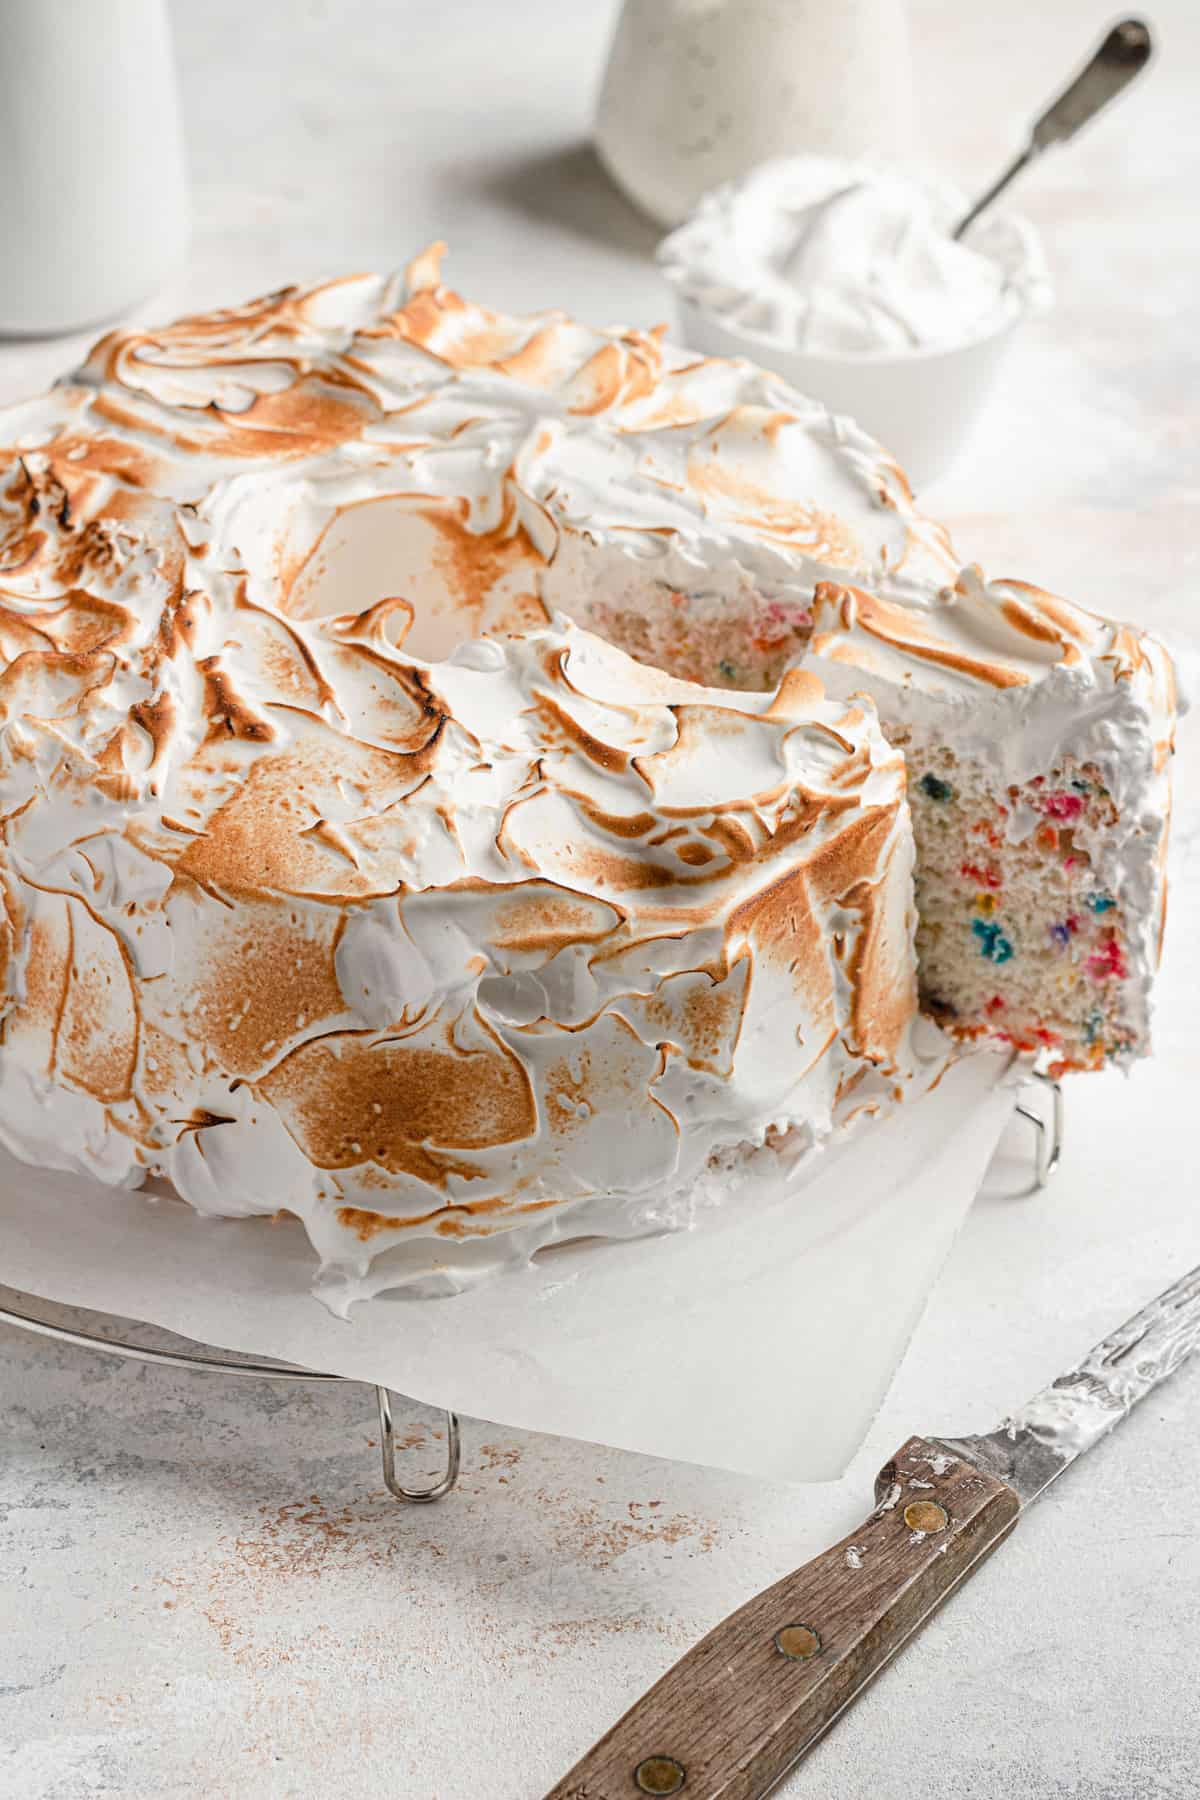 Funfetti angel food cake with marshmallow frosting